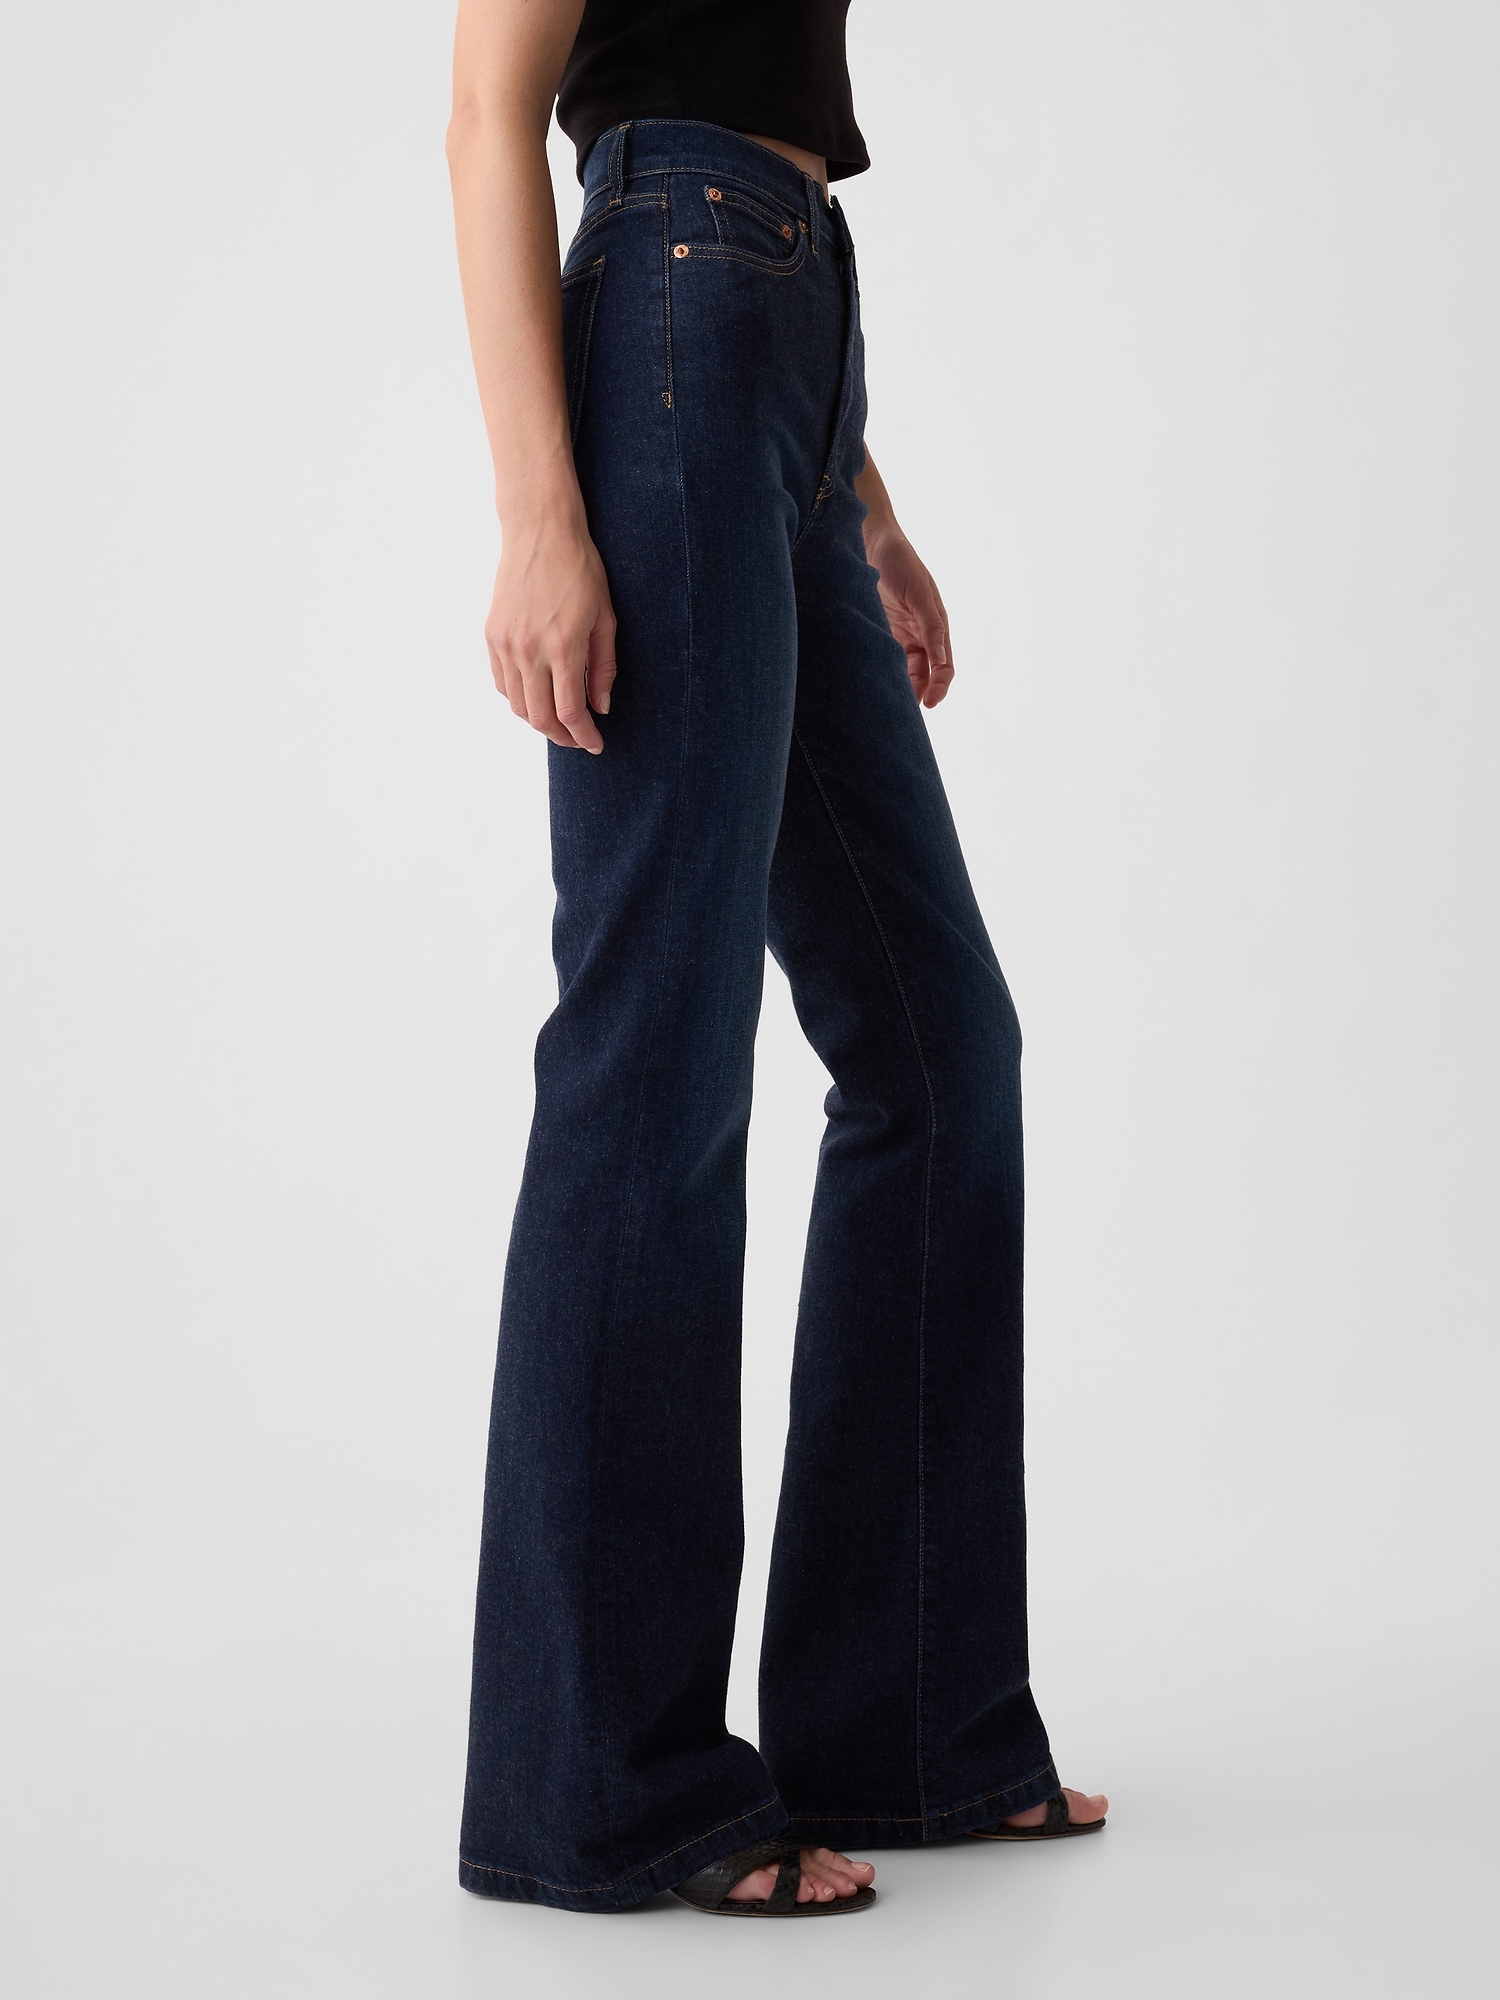 How to Style Flare Jeans for a '70s Vibe